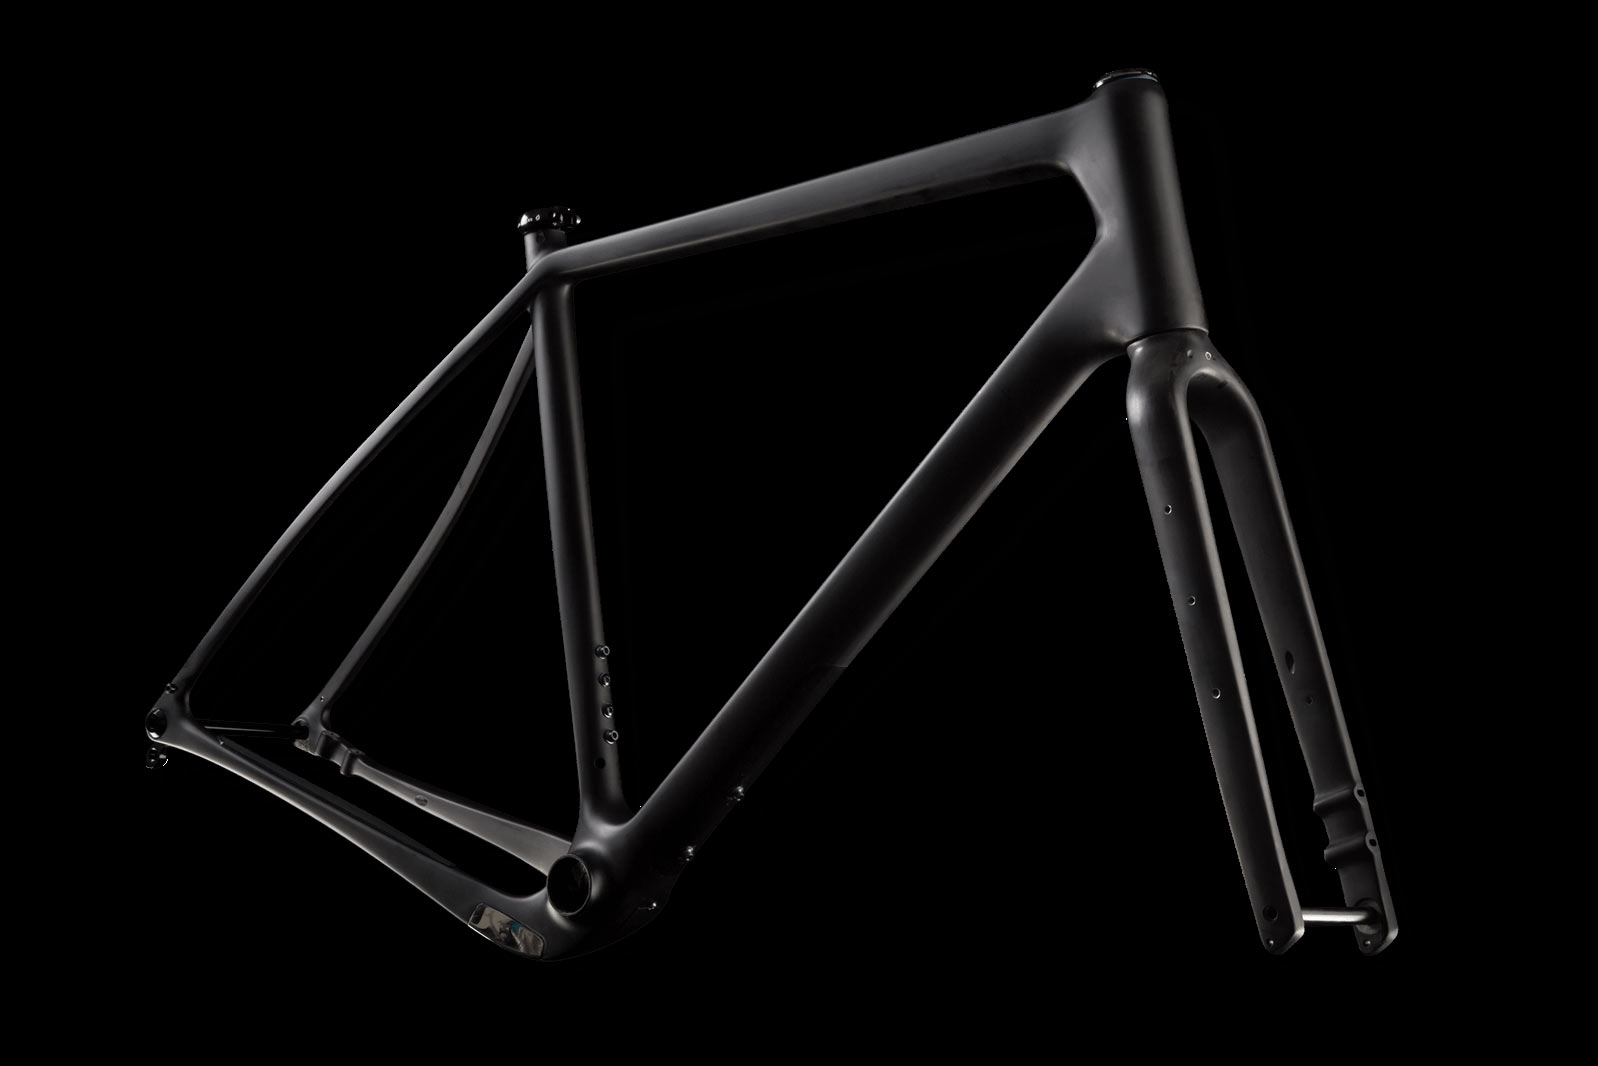 2019 Salsa Warbird early preview photos shows off version 4 of their carbon fiber gravel race bike